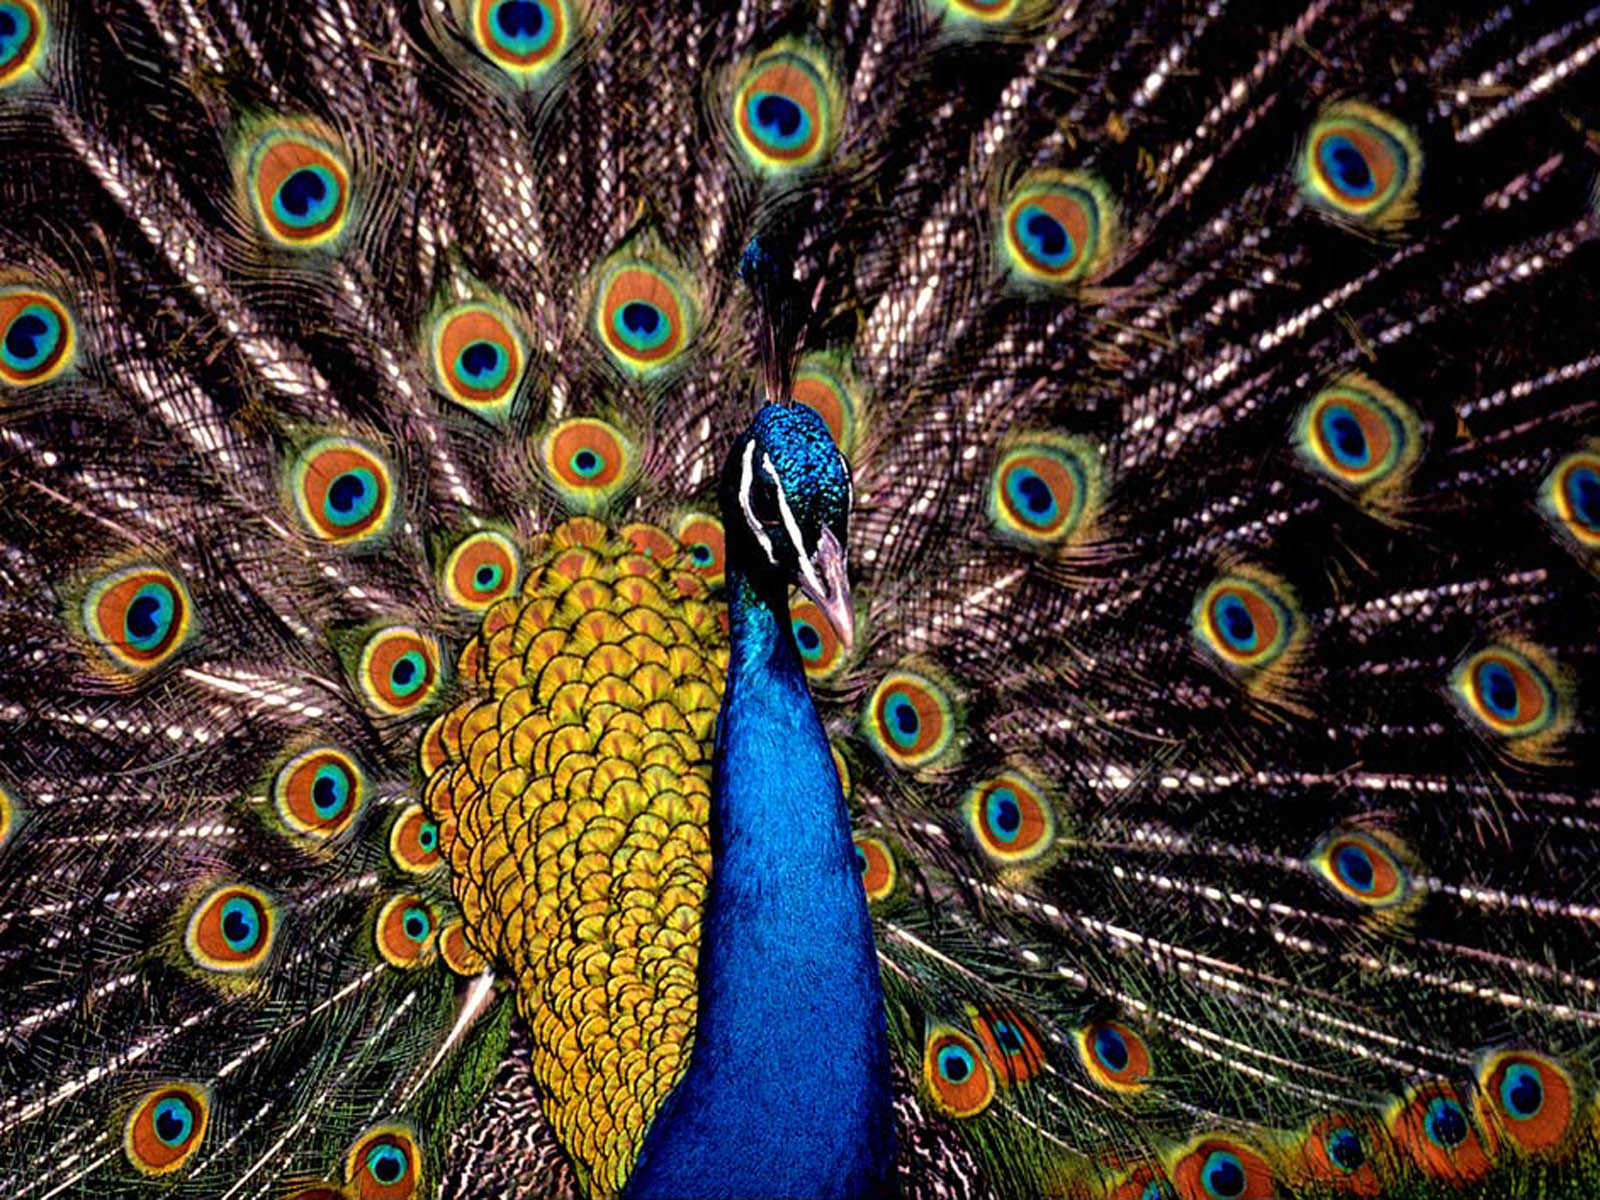 Wallpapers Peacock Wallpapers Coloring Wallpapers Download Free Images Wallpaper [coloring436.blogspot.com]